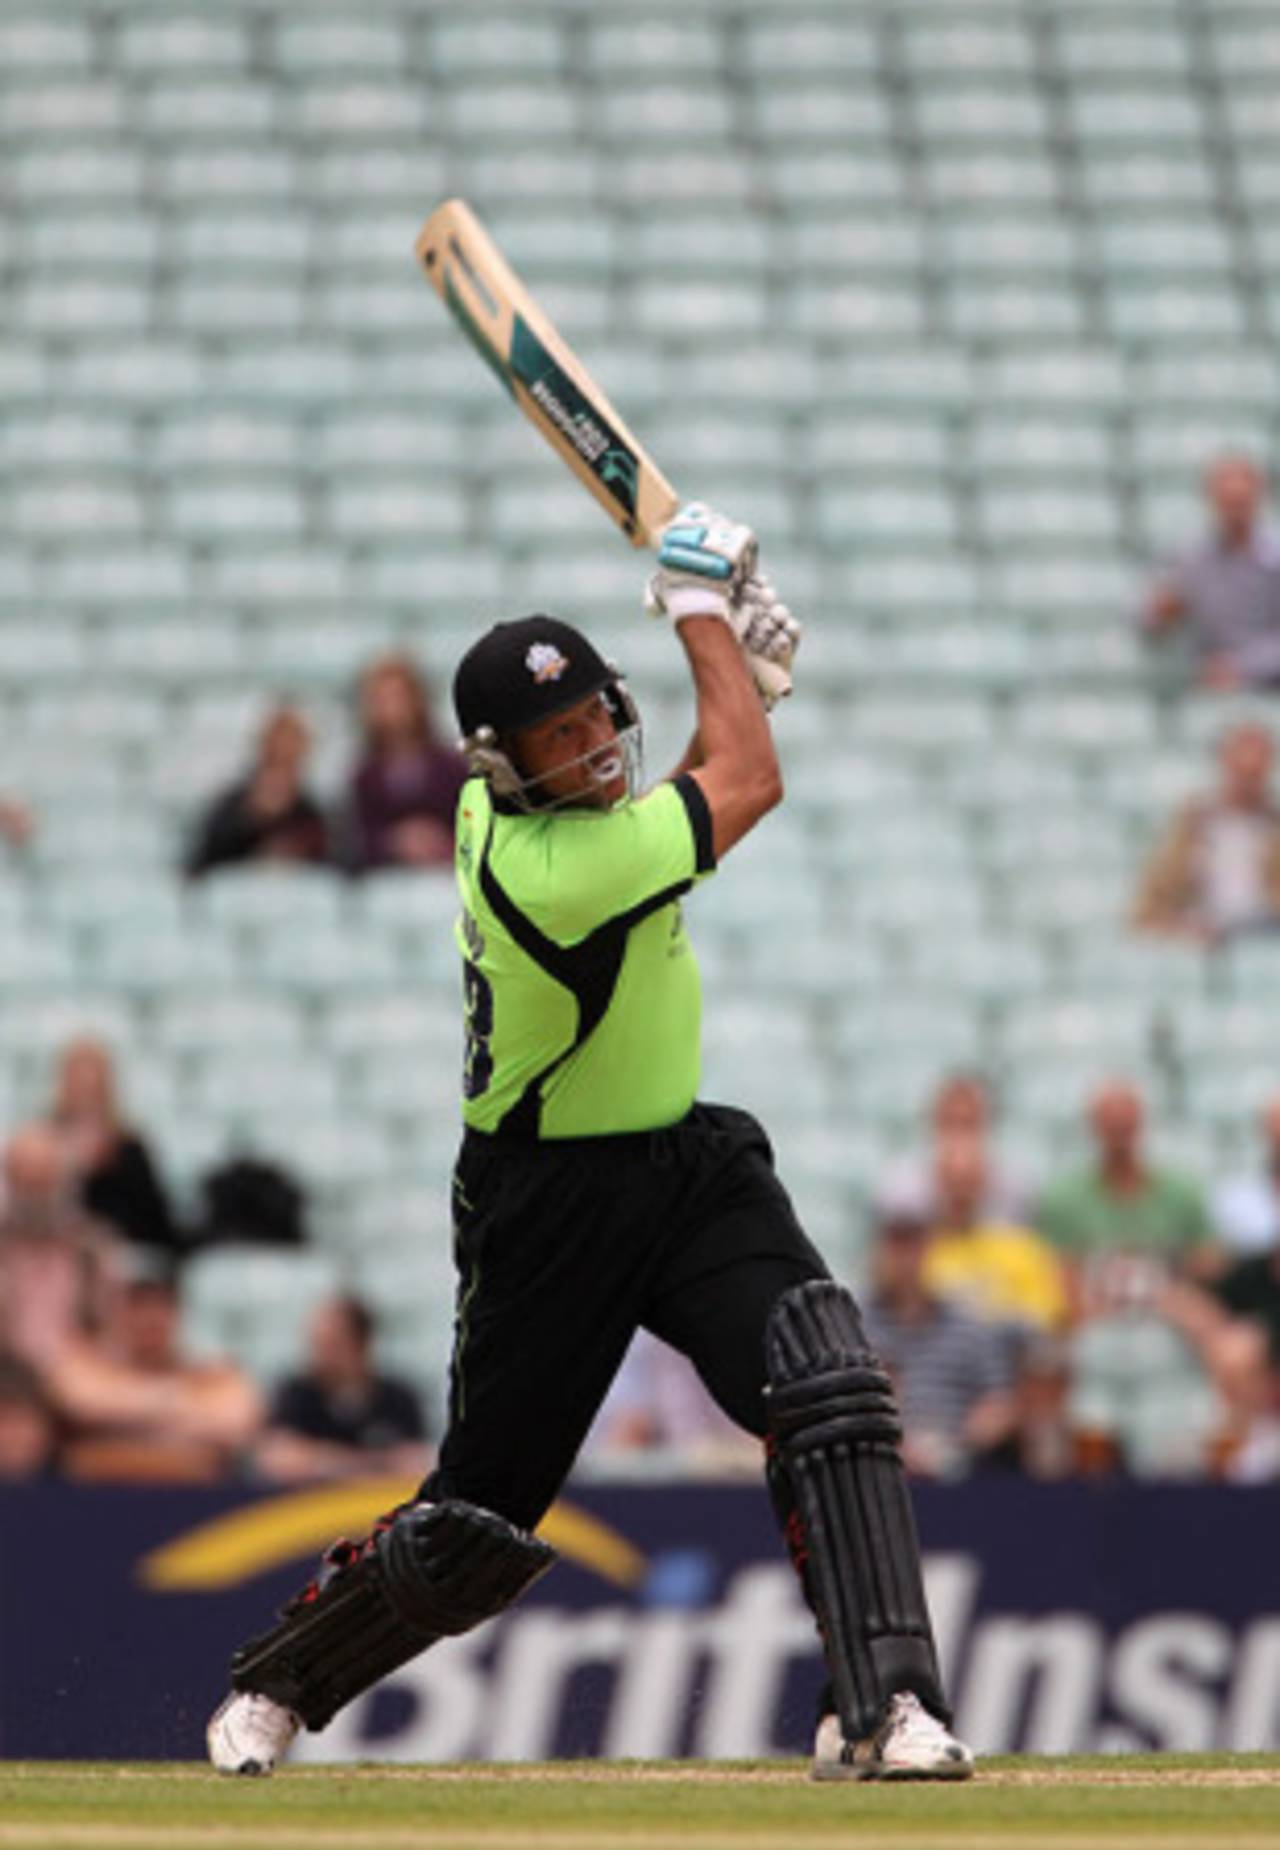 Andrew Symonds hit seven sixes in his 32-ball 62, Surrey v Kent, Friends Provident t20, The Oval, June 18, 2010